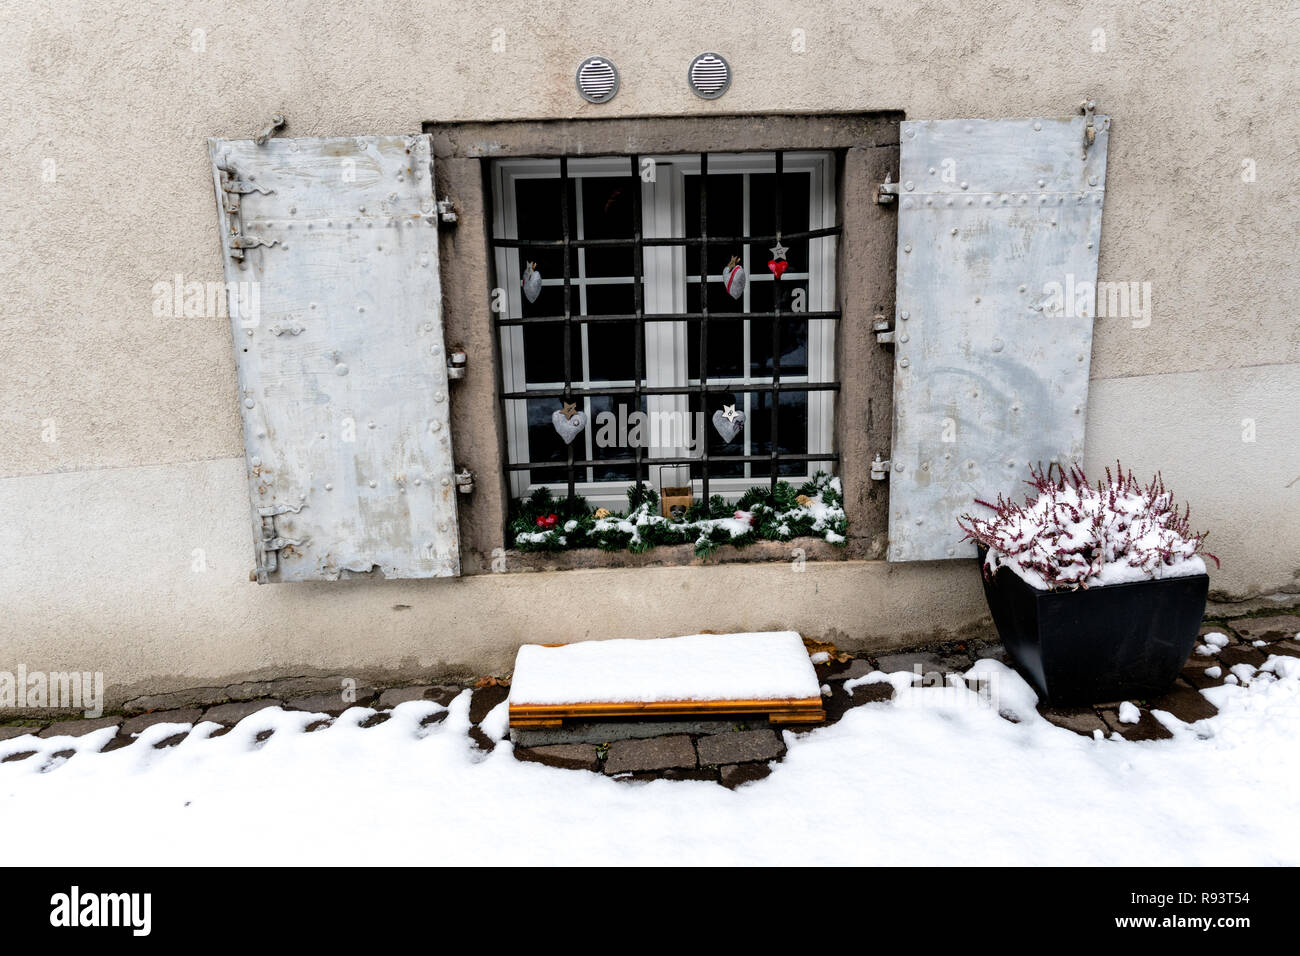 imaginative advent calendar and Christmas decorations hanging from a ground floor window in a snowy village in the Swiss Alps during the holidays Stock Photo